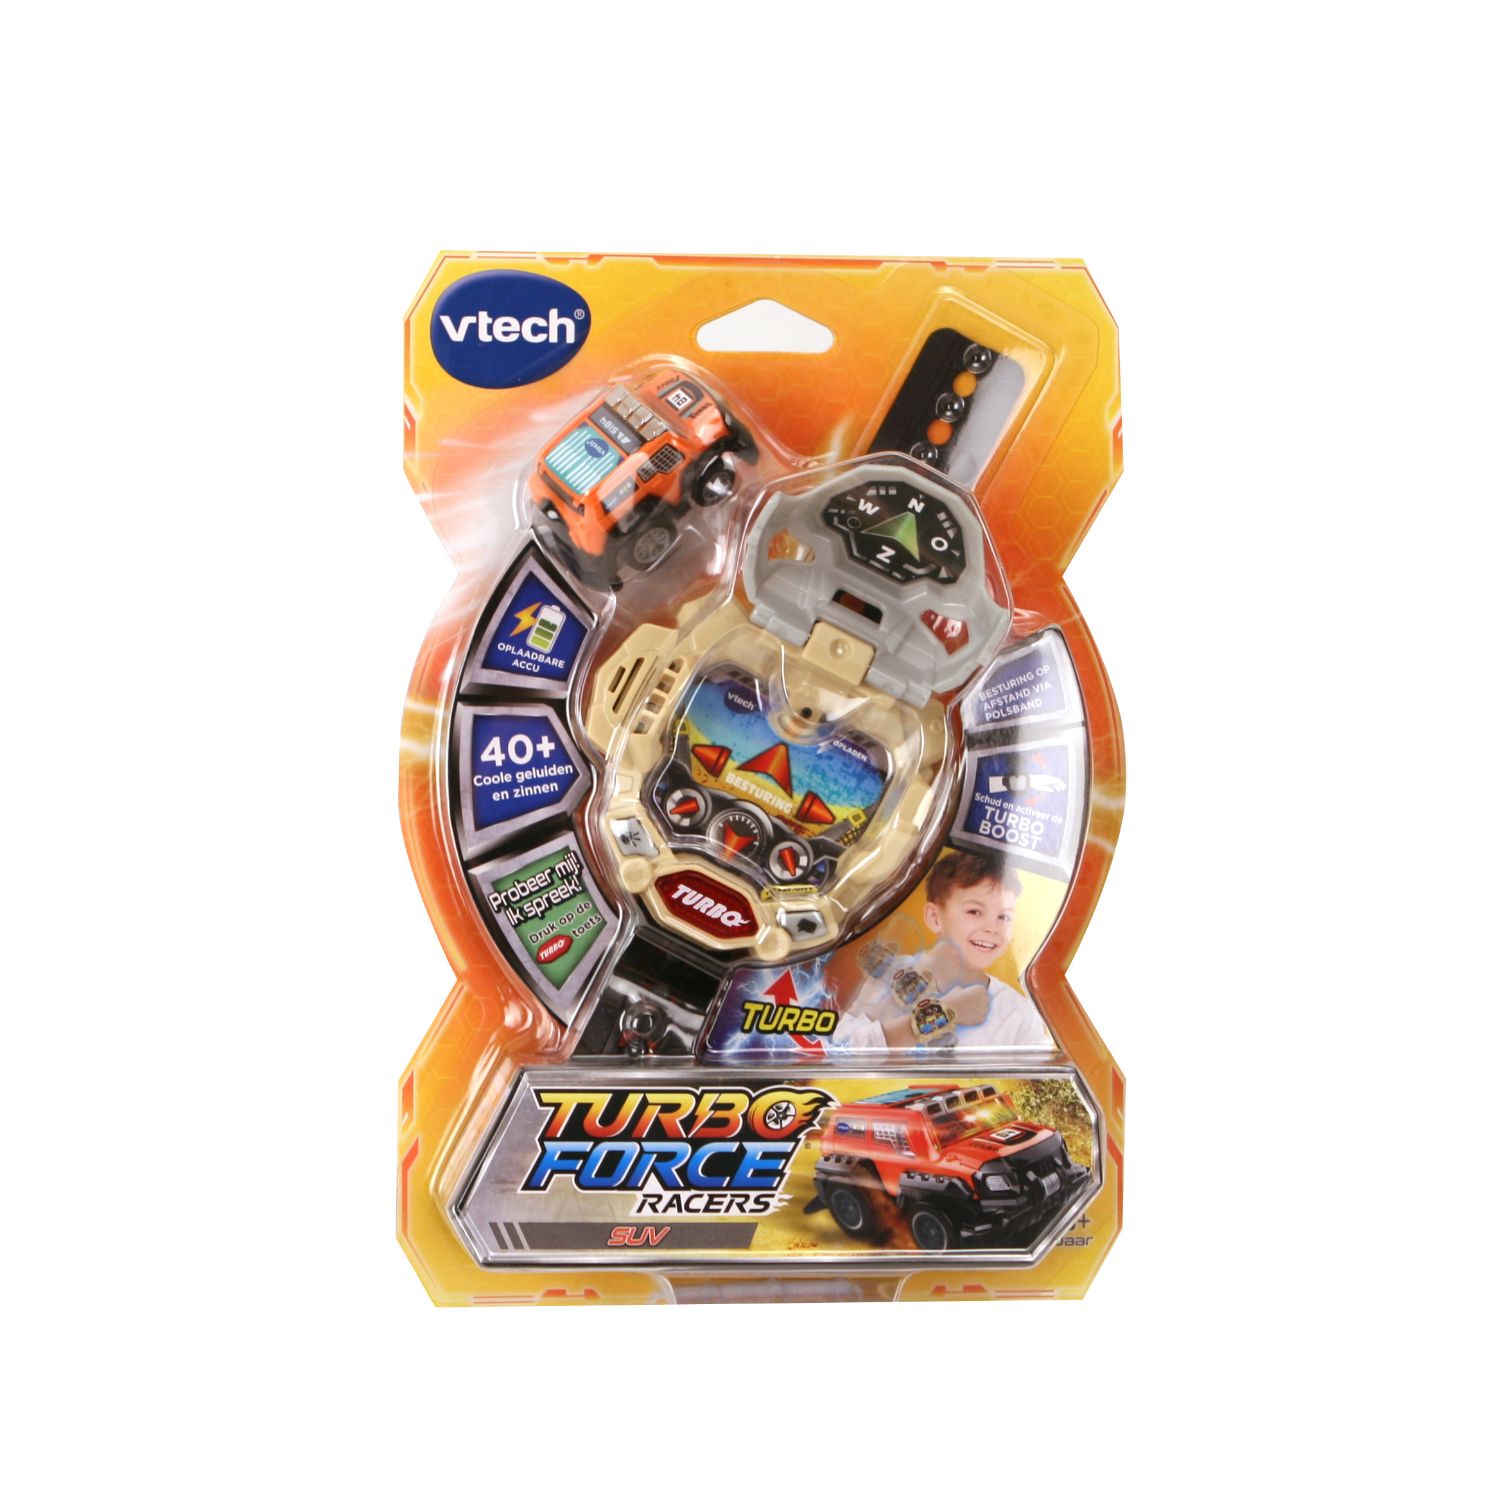 VTECH TURBO FORCE RACERS SUV